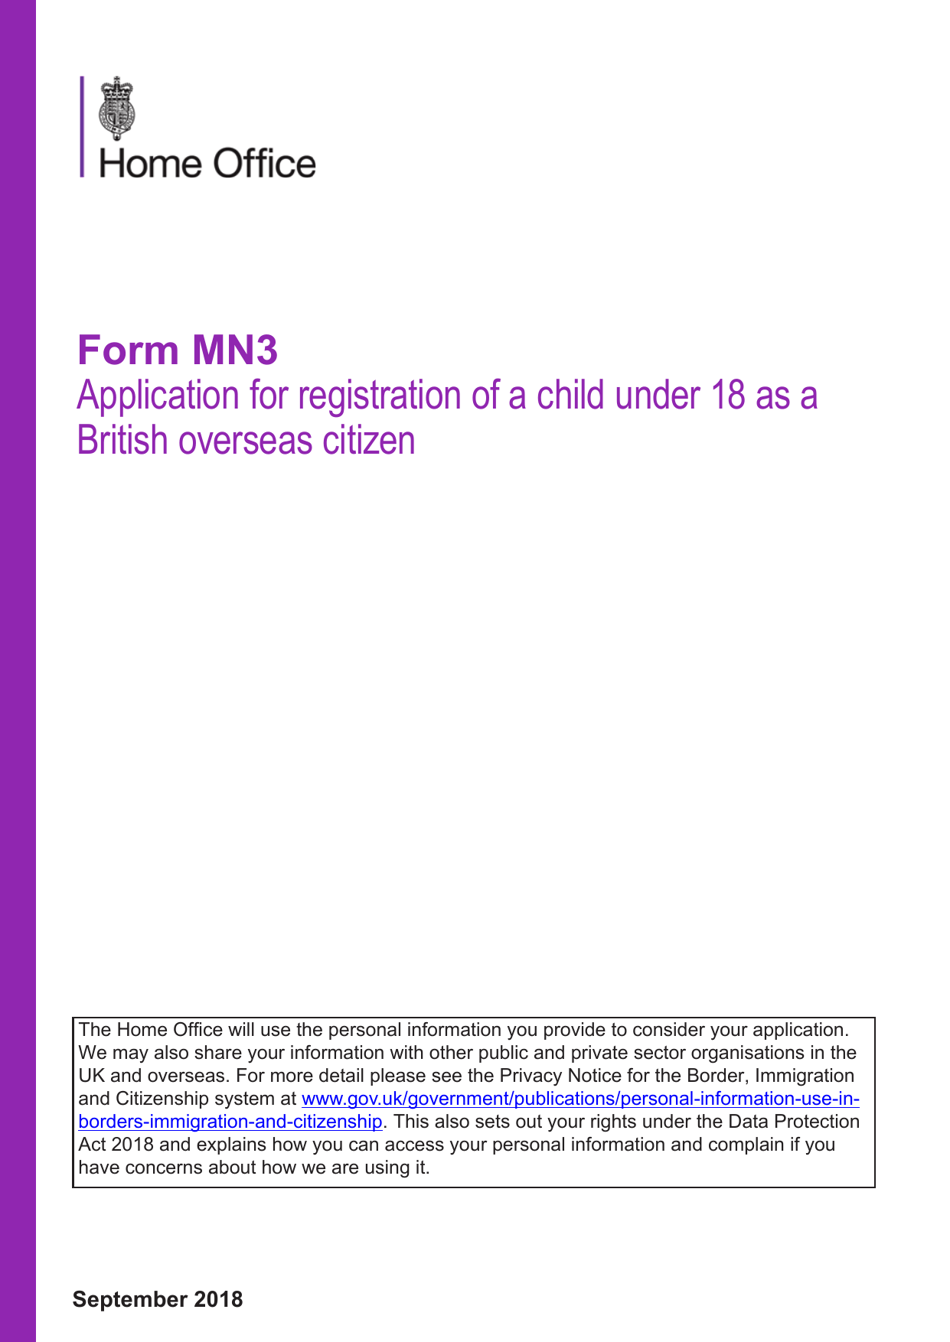 Form MN3 Application for Registration of a Child Under 18 as a British Overseas Citizen - United Kingdom, Page 1